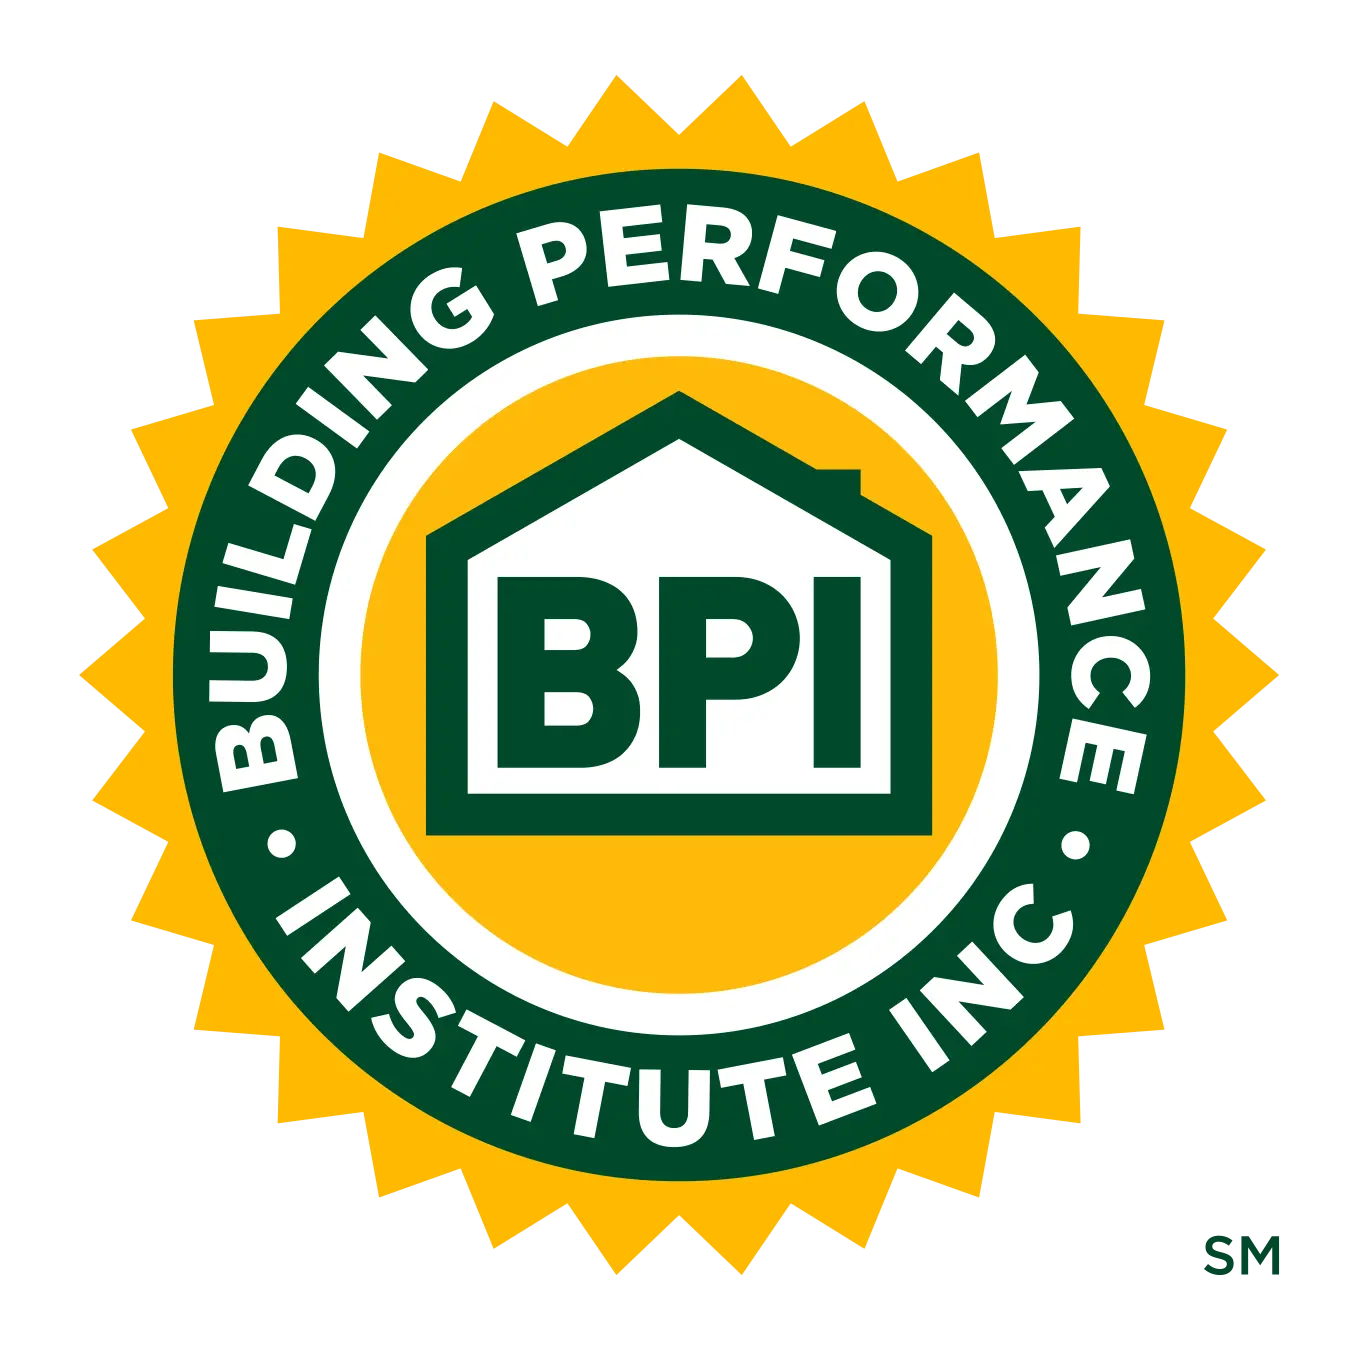 bpi energy auditor training - How much is the BPI exam